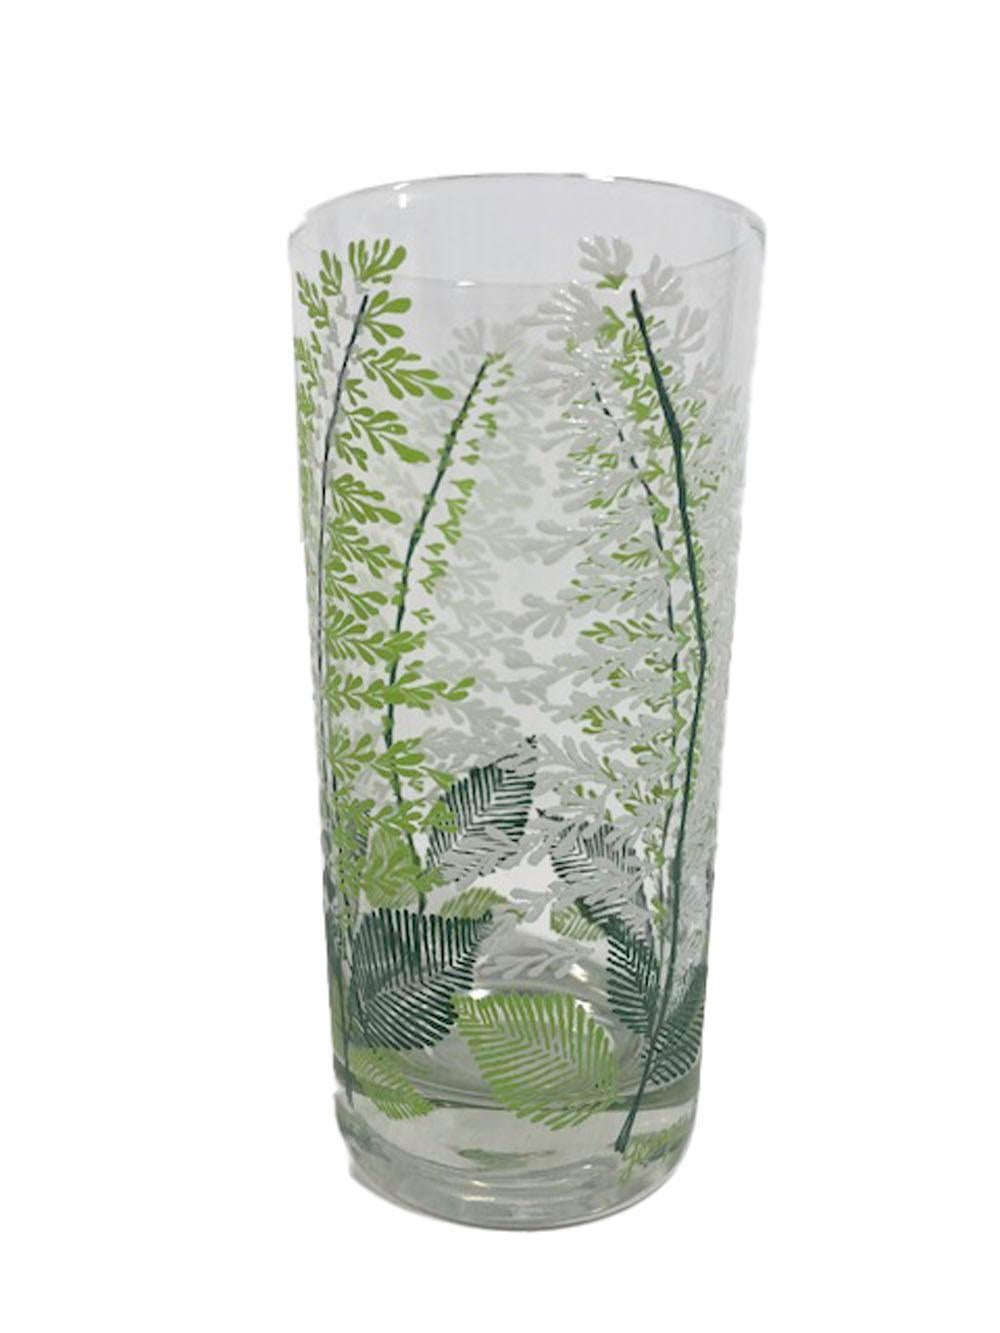 Vintage Set of 6 Fern Decorated Highball Glasses Signed Georges Briard In Good Condition For Sale In Nantucket, MA